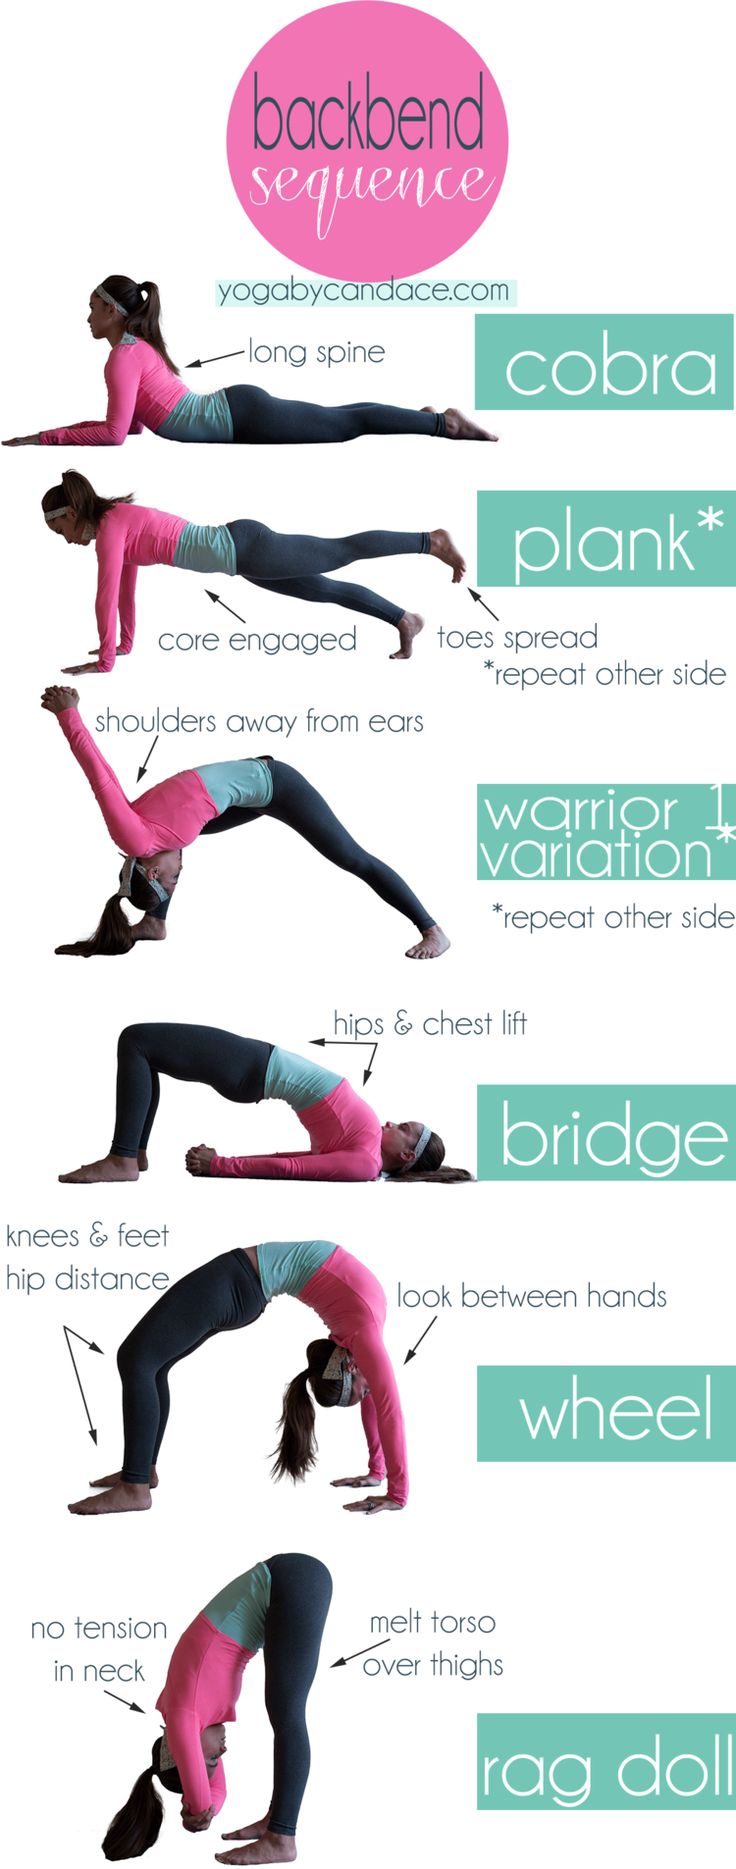 Yoga sequence for back